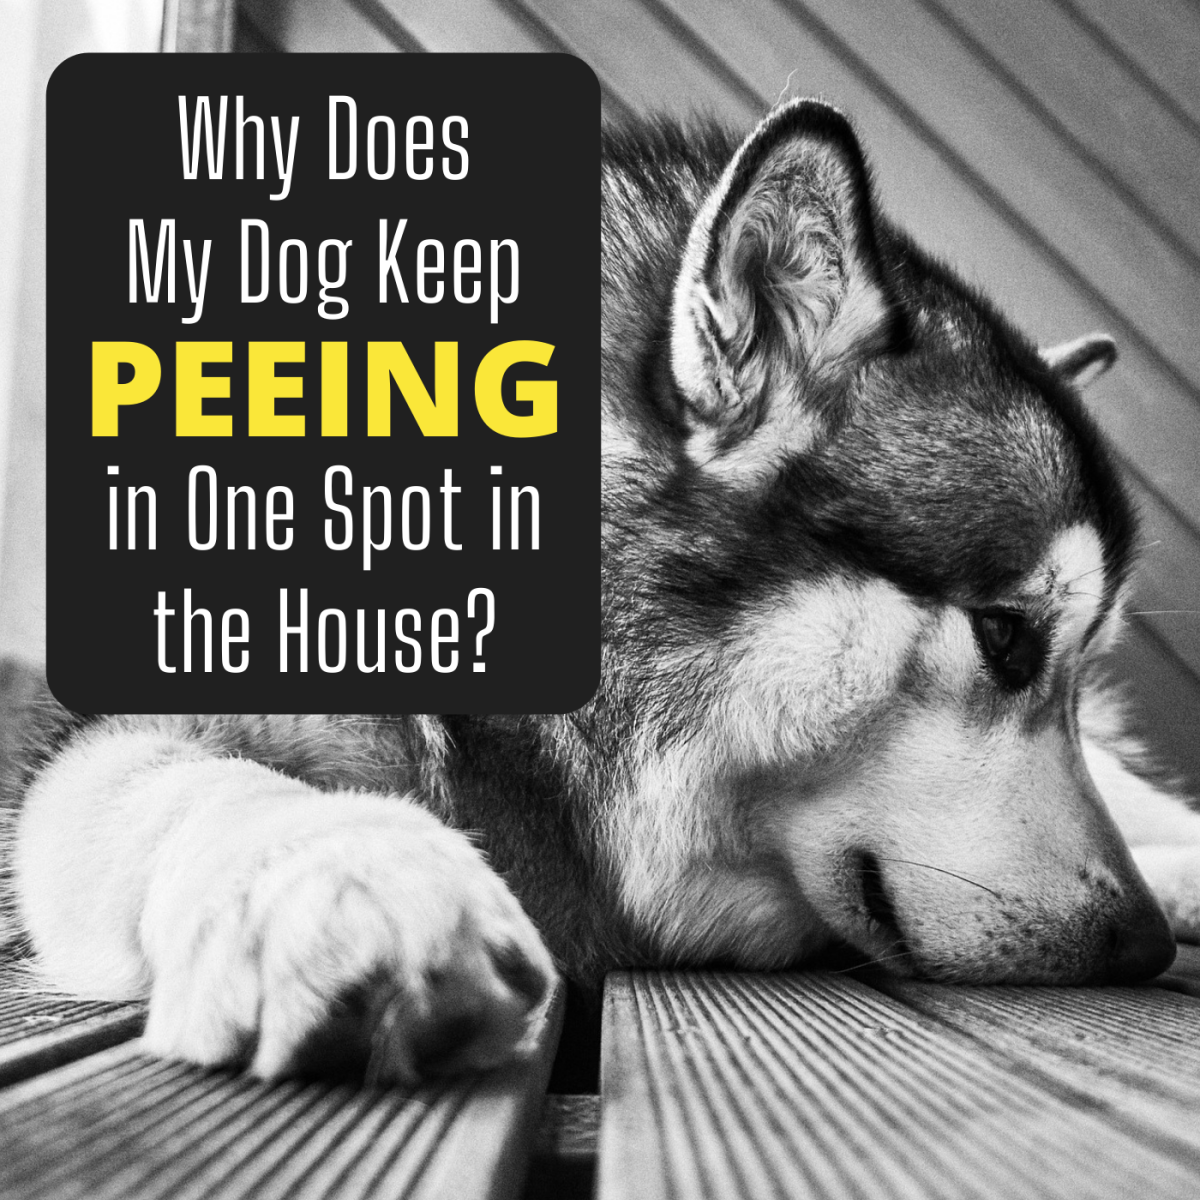 Does your dog pee (or worse) in the house—and always in the same spot? Learn why and what you can do to stop it from happening.